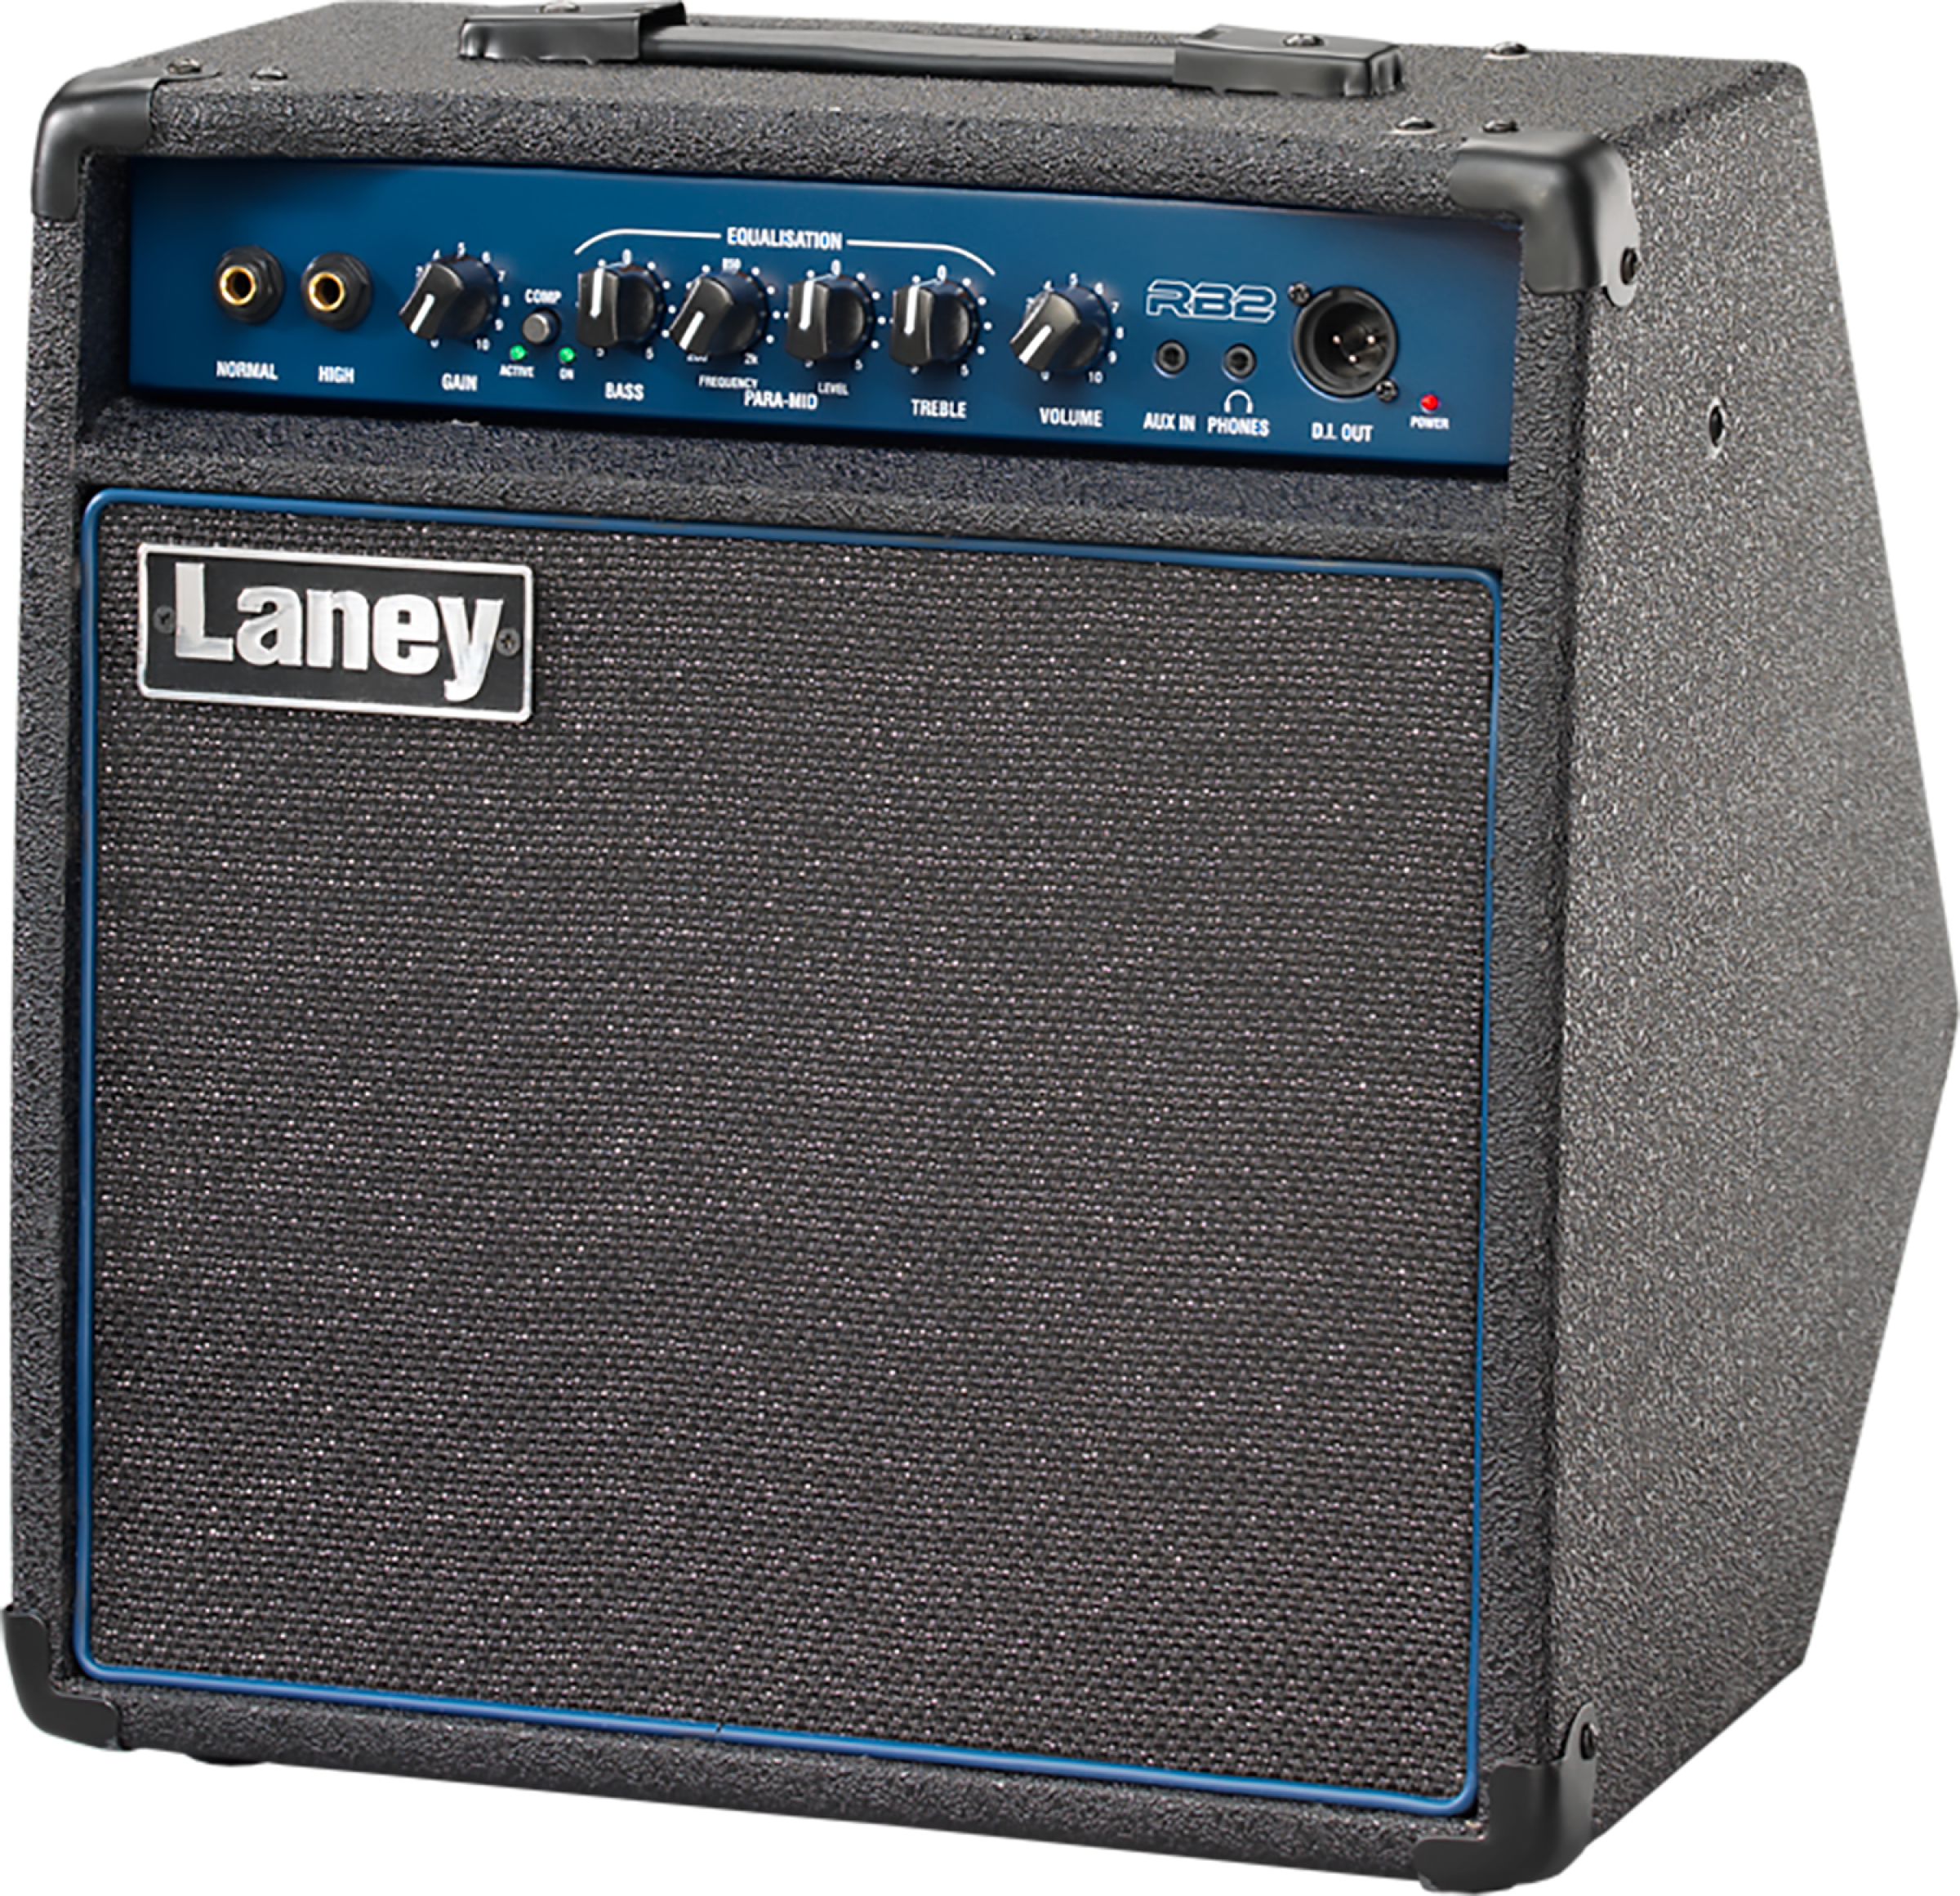 Laney Rb2 30w 1x10 - Bass Combo - Variation 2